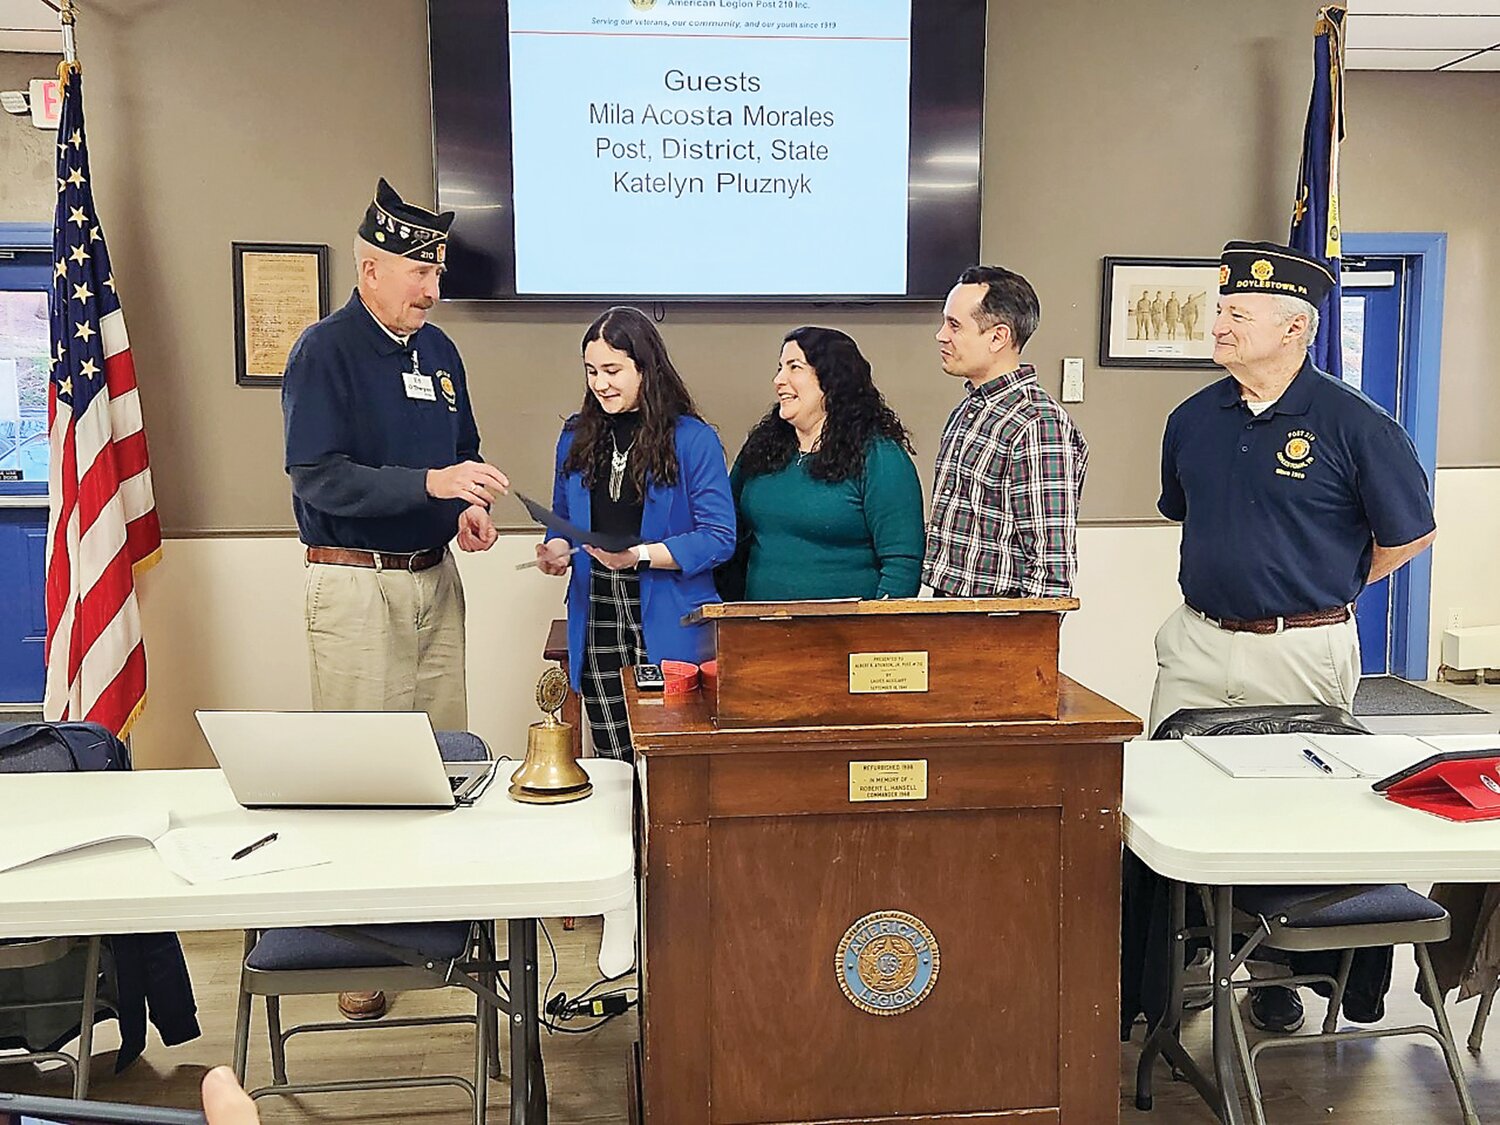 Ed O'Dwyer, American Legion Post 210 finance officer, presents a certificate to Mila Acosta-Morales along with a check for $1,000. Looking on are her Parents, Mirtha and Osvil Acosta-Morales, and Commander Pete Scott.